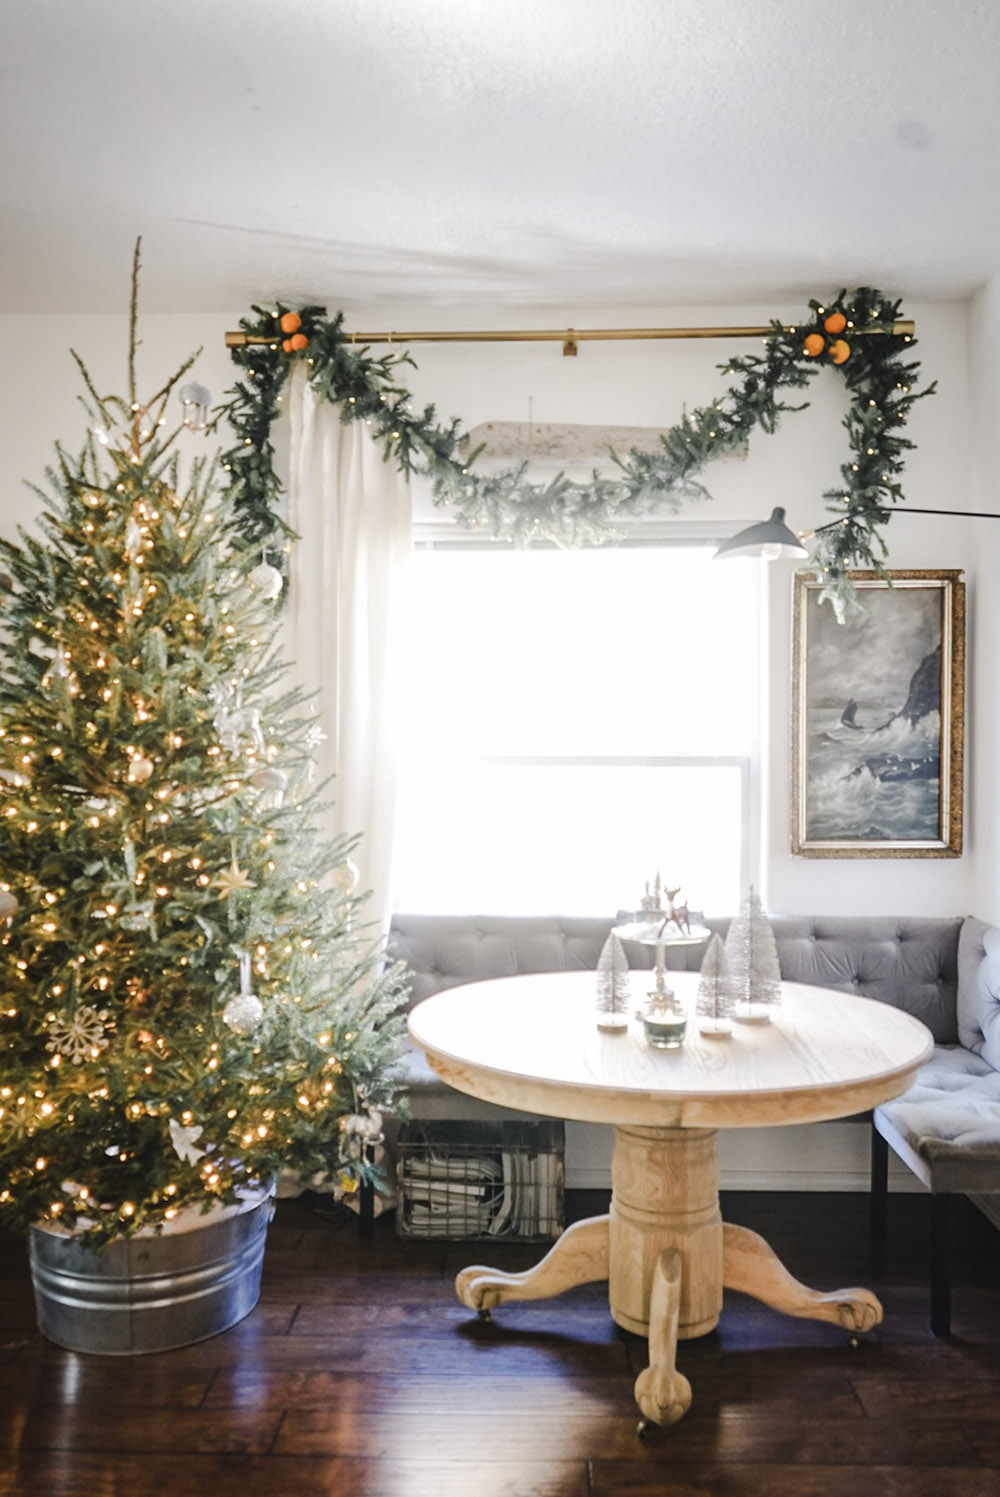 A room with a decorated Christmas tree sitting in metal tub.